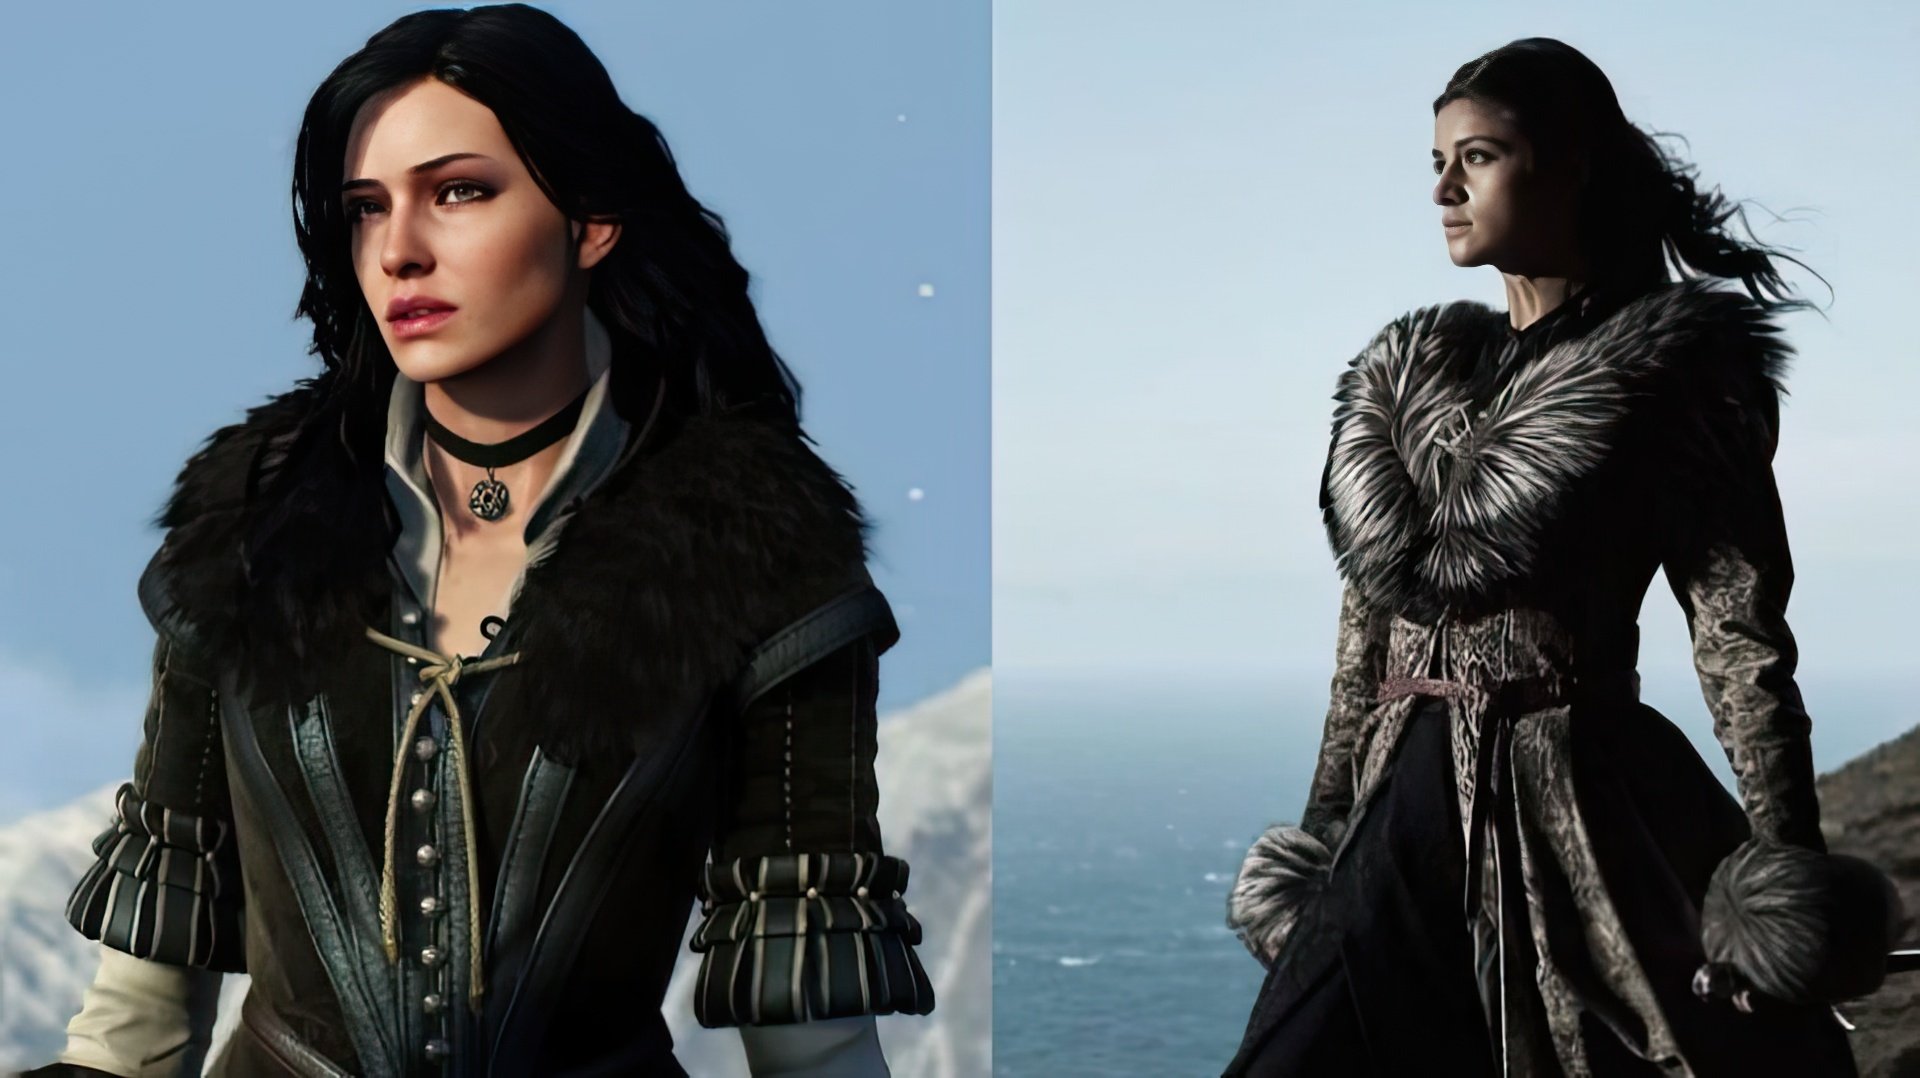 Yennefer in 'The Witcher' game and performed by Anya Chalotra